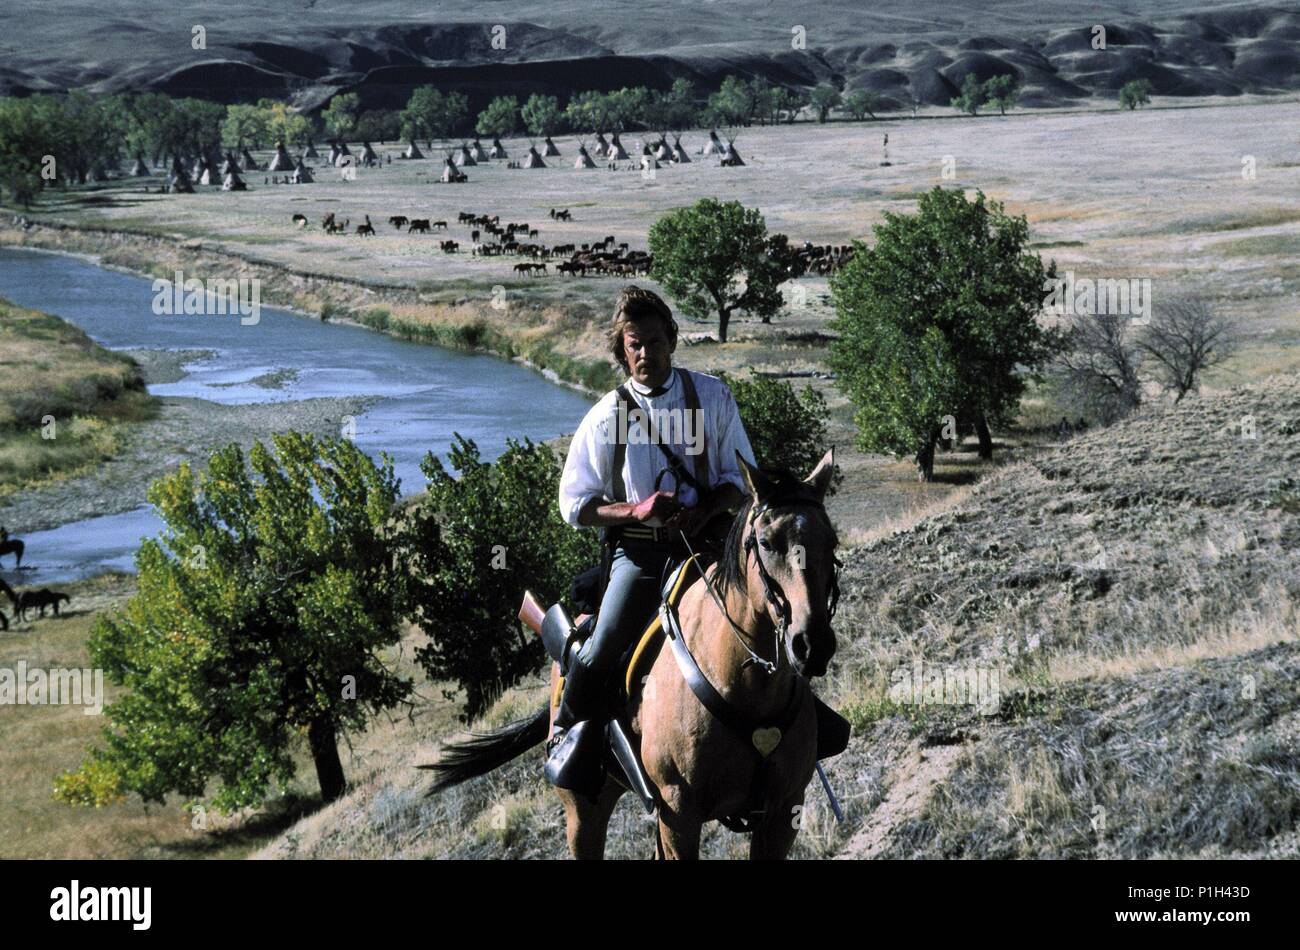 Original Film Title: DANCES WITH WOLVES.  English Title: DANCES WITH WOLVES.  Film Director: KEVIN COSTNER.  Year: 1990.  Stars: KEVIN COSTNER. Credit: ORION PICTURES / Album Stock Photo